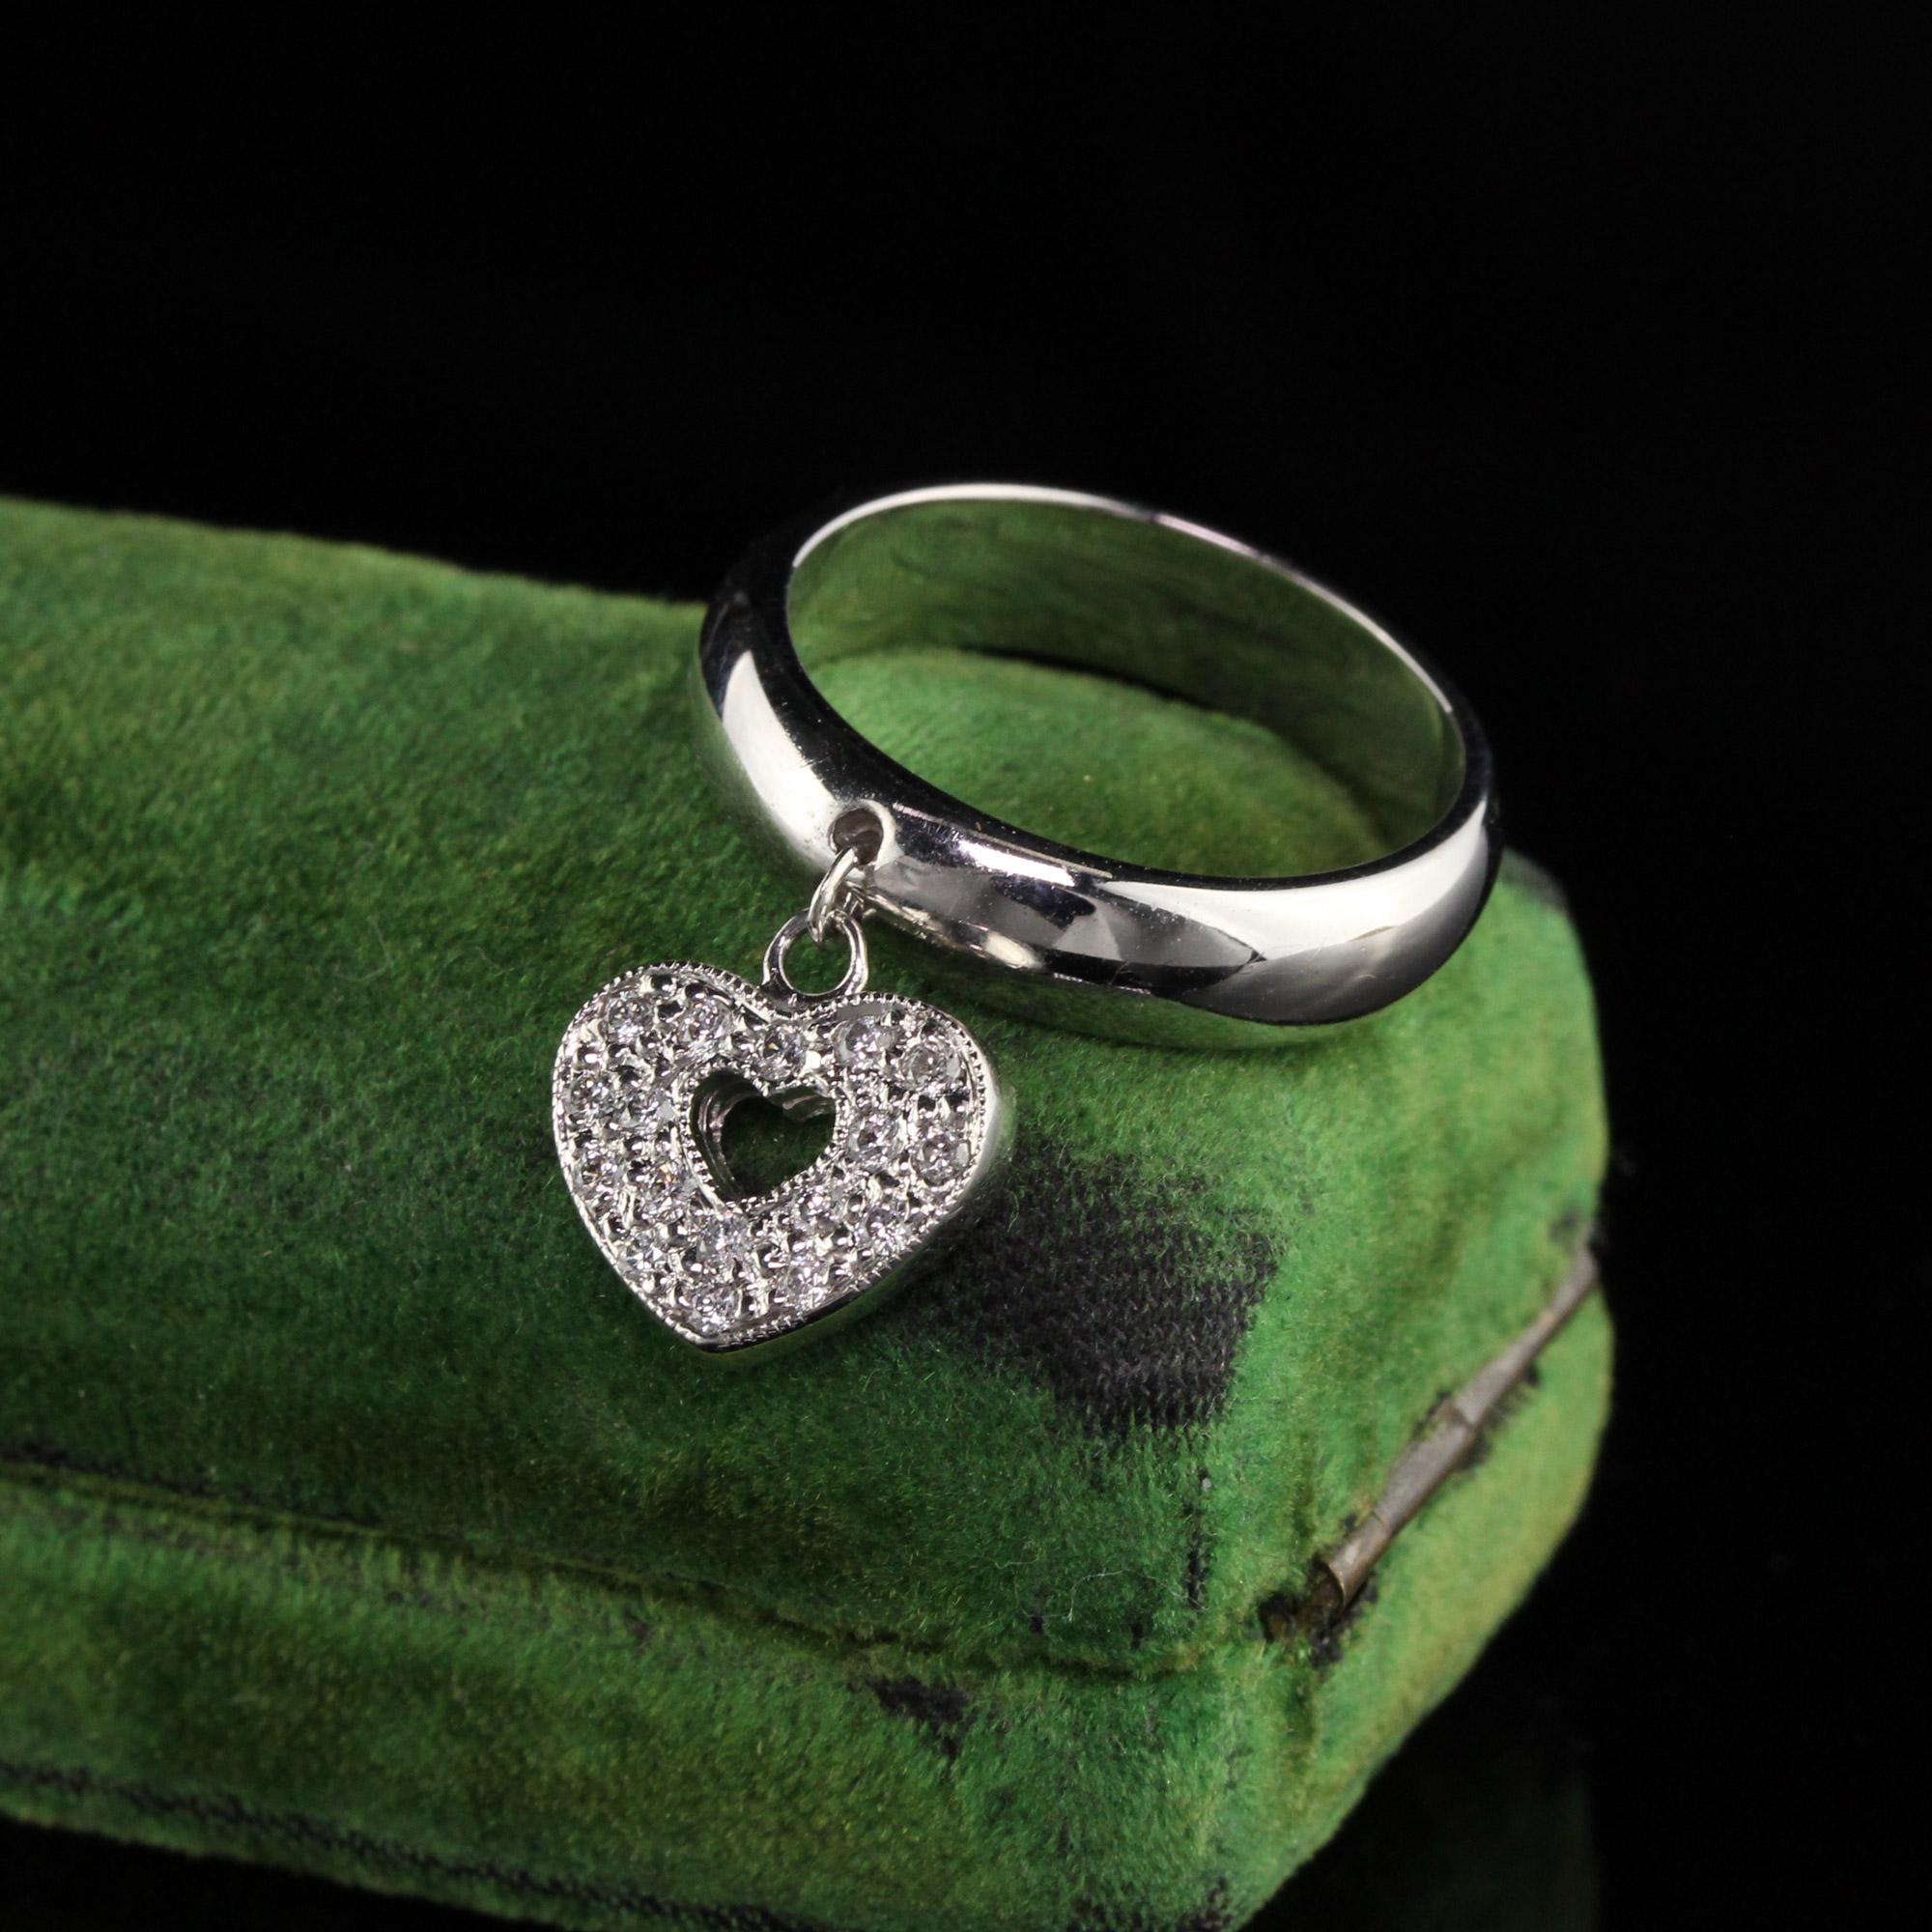 Gorgeous white gold ring with dazzling diamond heart charm.

Metal: 18K White Gold

Weight: 7.5 Grams

Total Diamond Weight: Approximately 0.50 ct.

Diamond Color: H

Diamond Clarity: SI1

Ring Size: 6.75 (sizable)

Measurements: Band measures 4.78